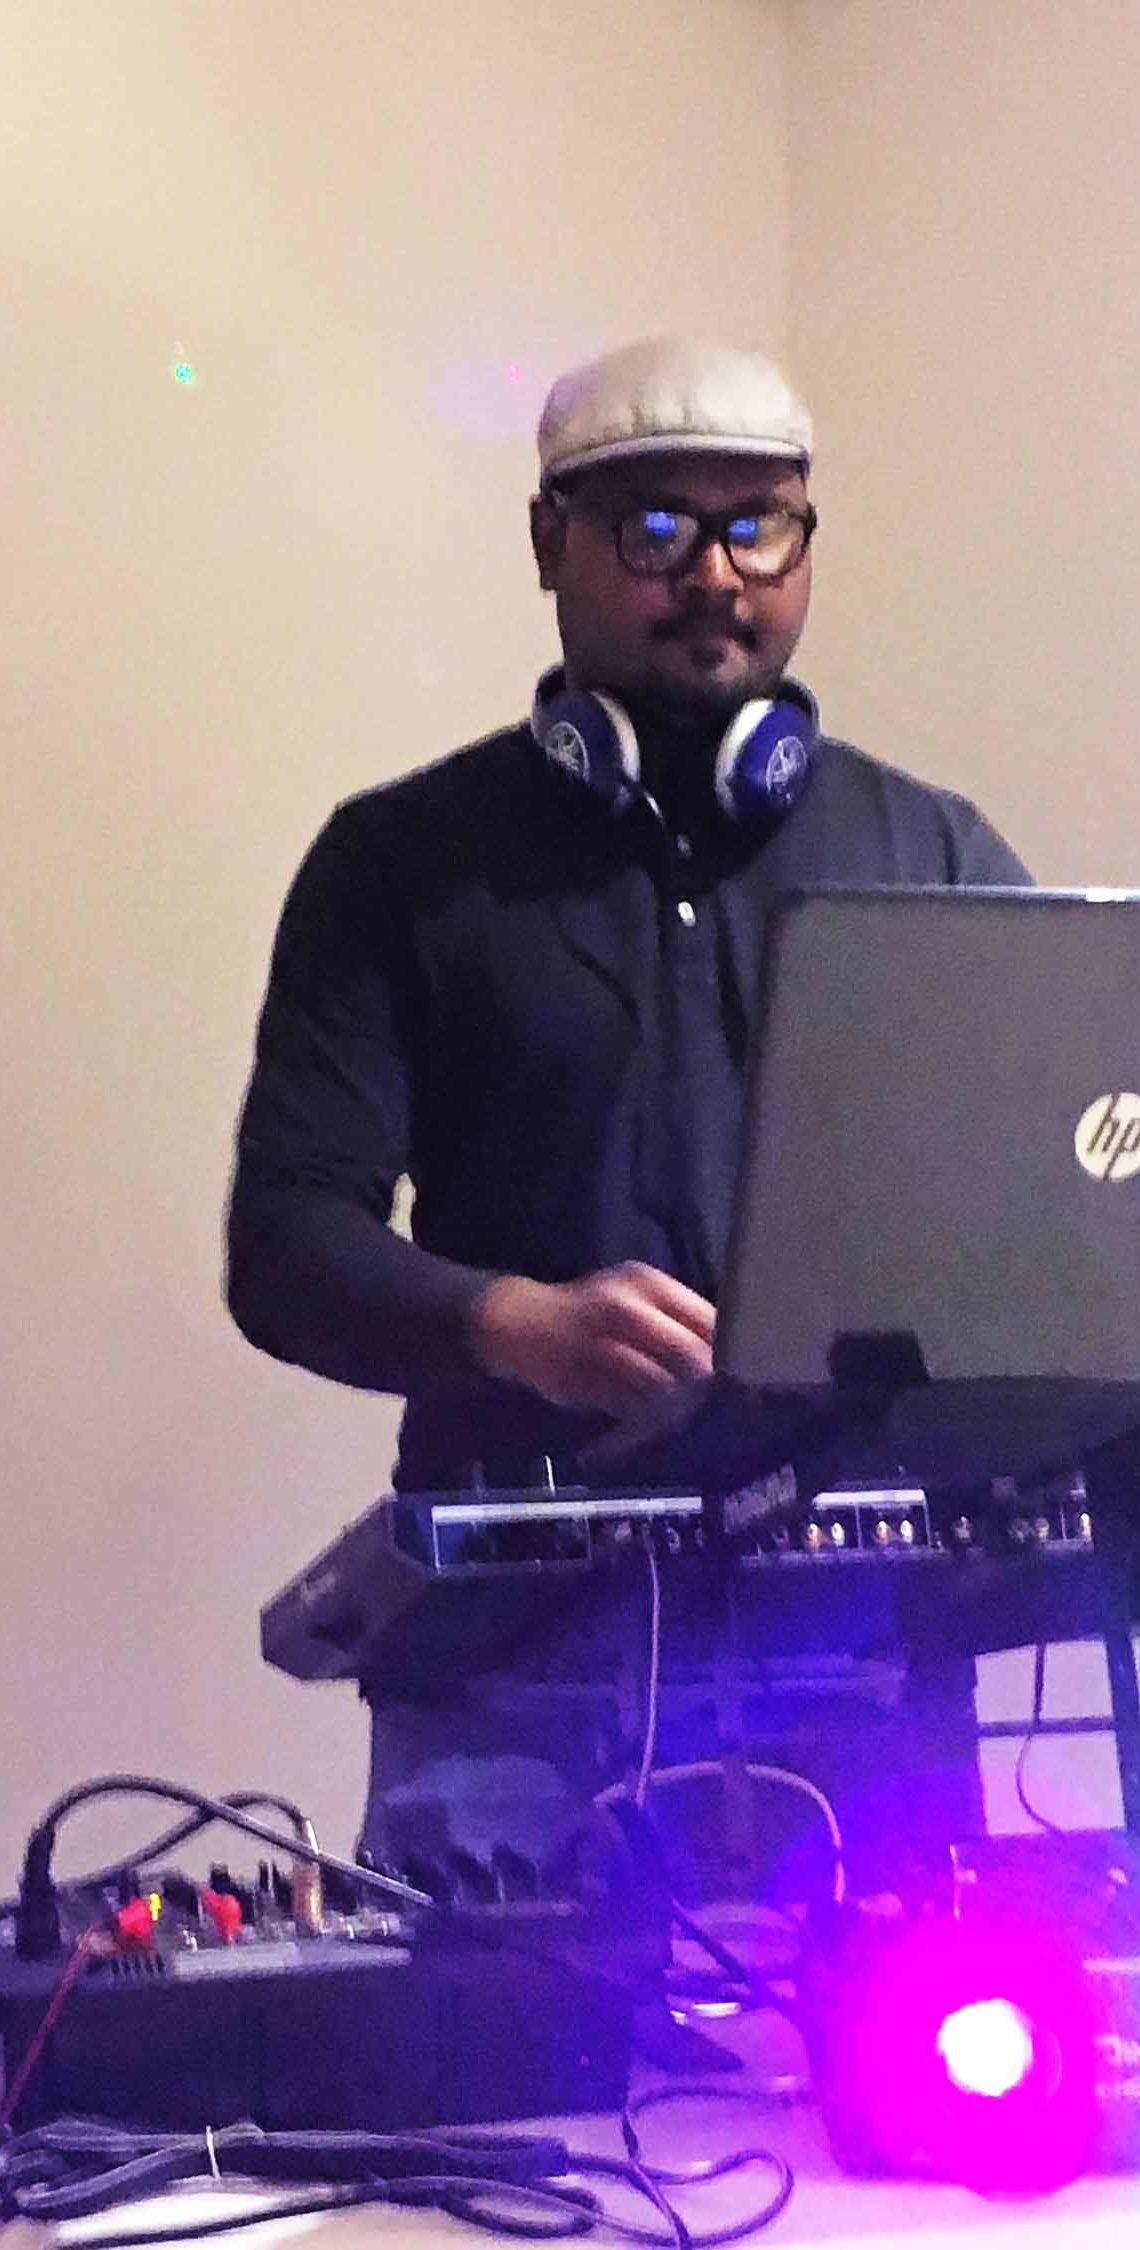 Hira DJ for a private party